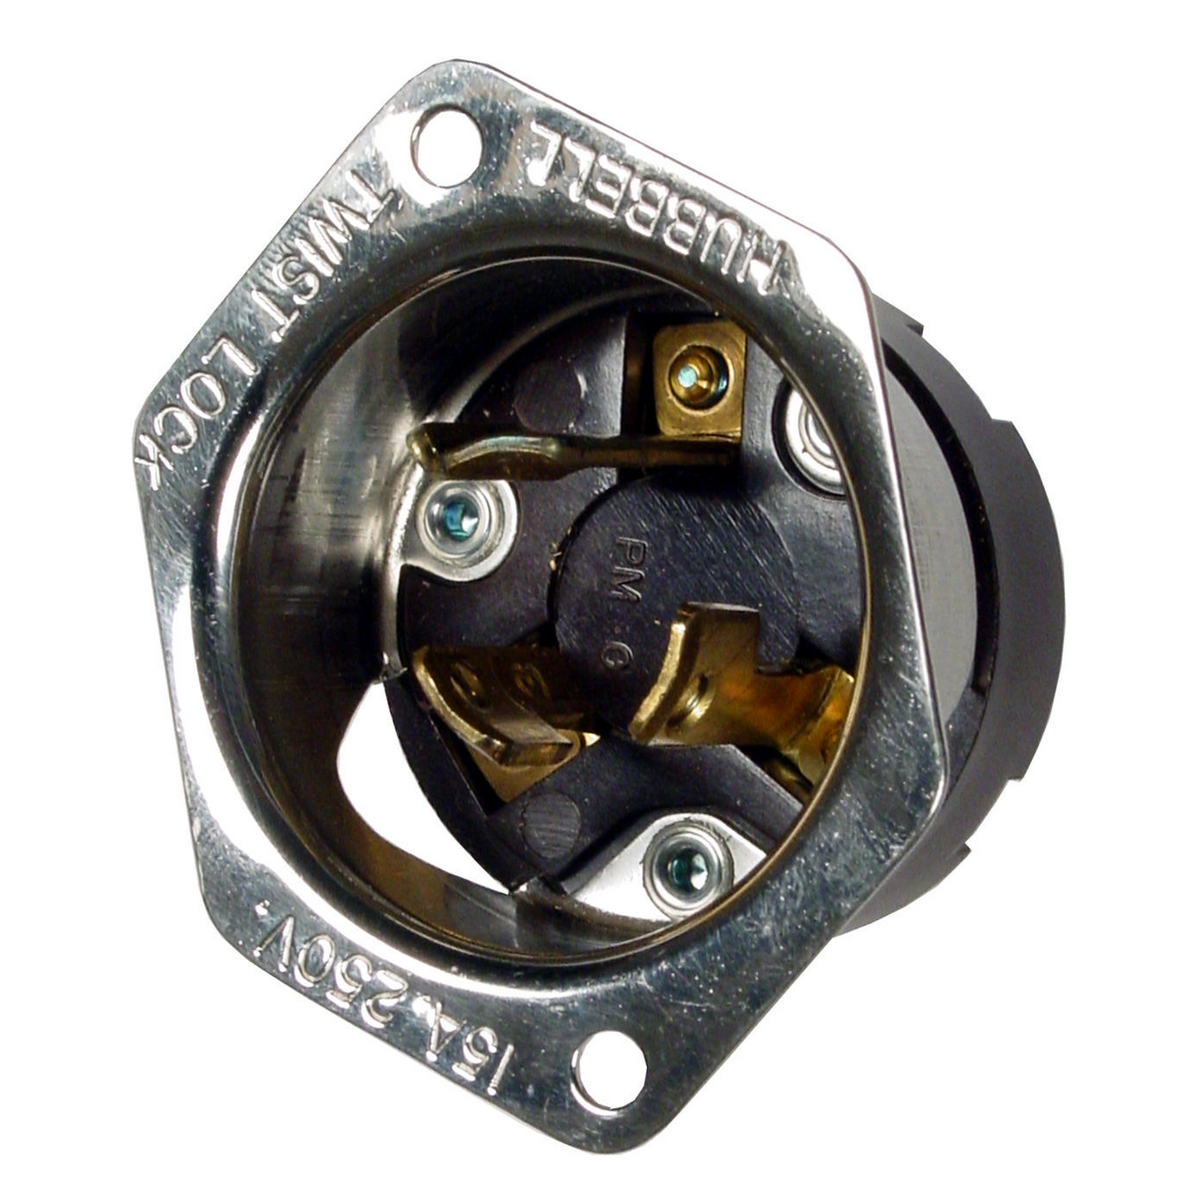 Locking Devices, Twist-Lock®, Industrial, Flanged Receptacle, 15A 250V, 2-Pole  3-Wire Grounding, L6-15P, Screw Terminal, White, HBL4586